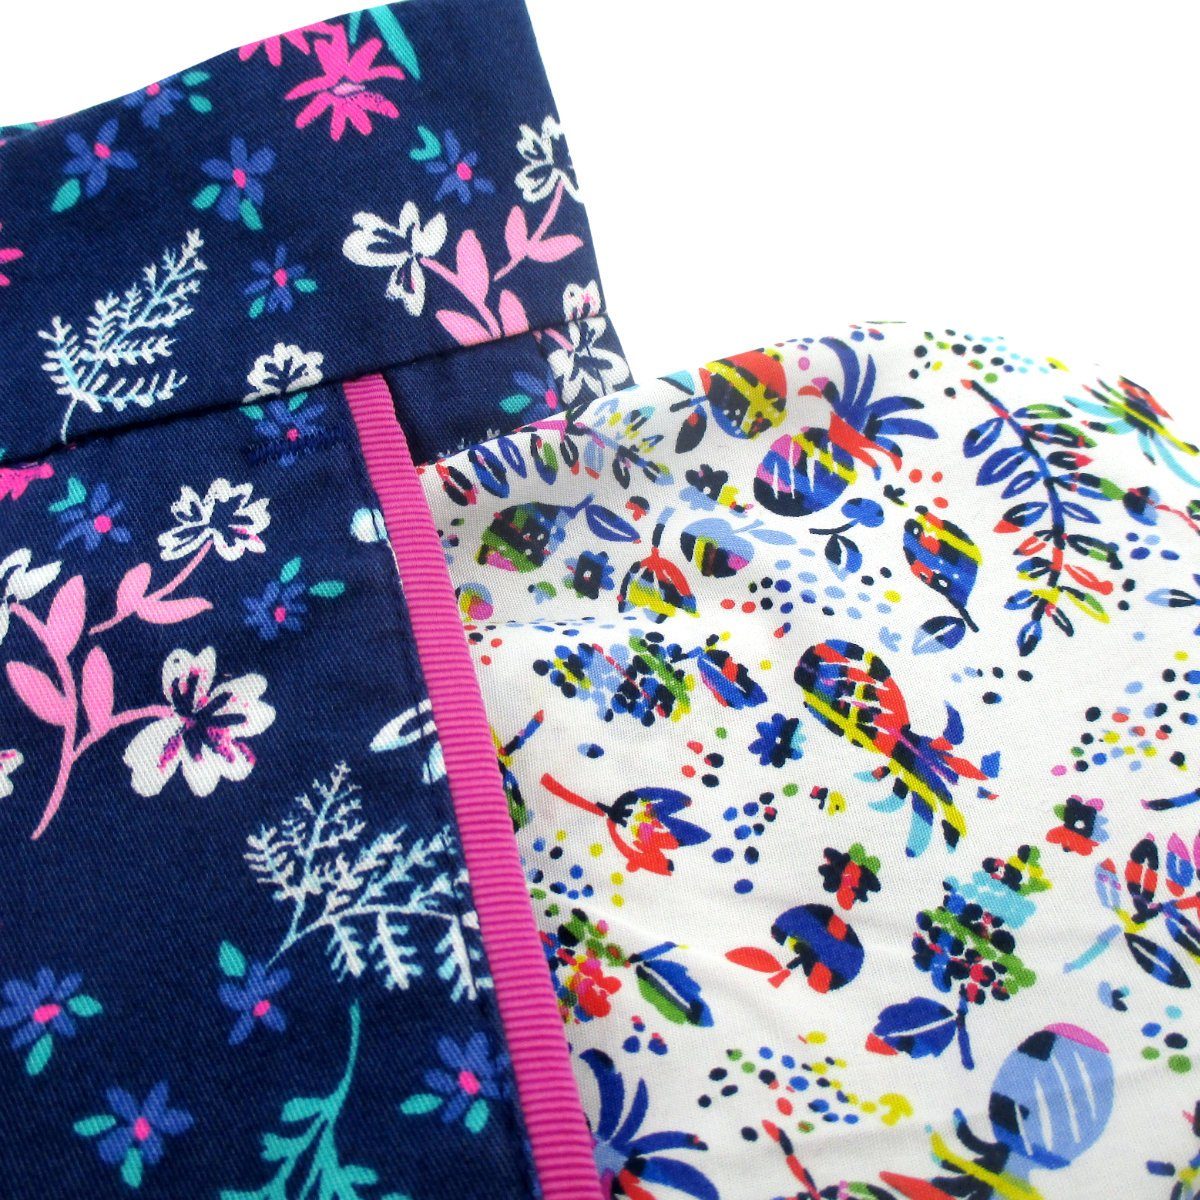 Rock Atoll Contrasting Lining Pockets in Fun Prints